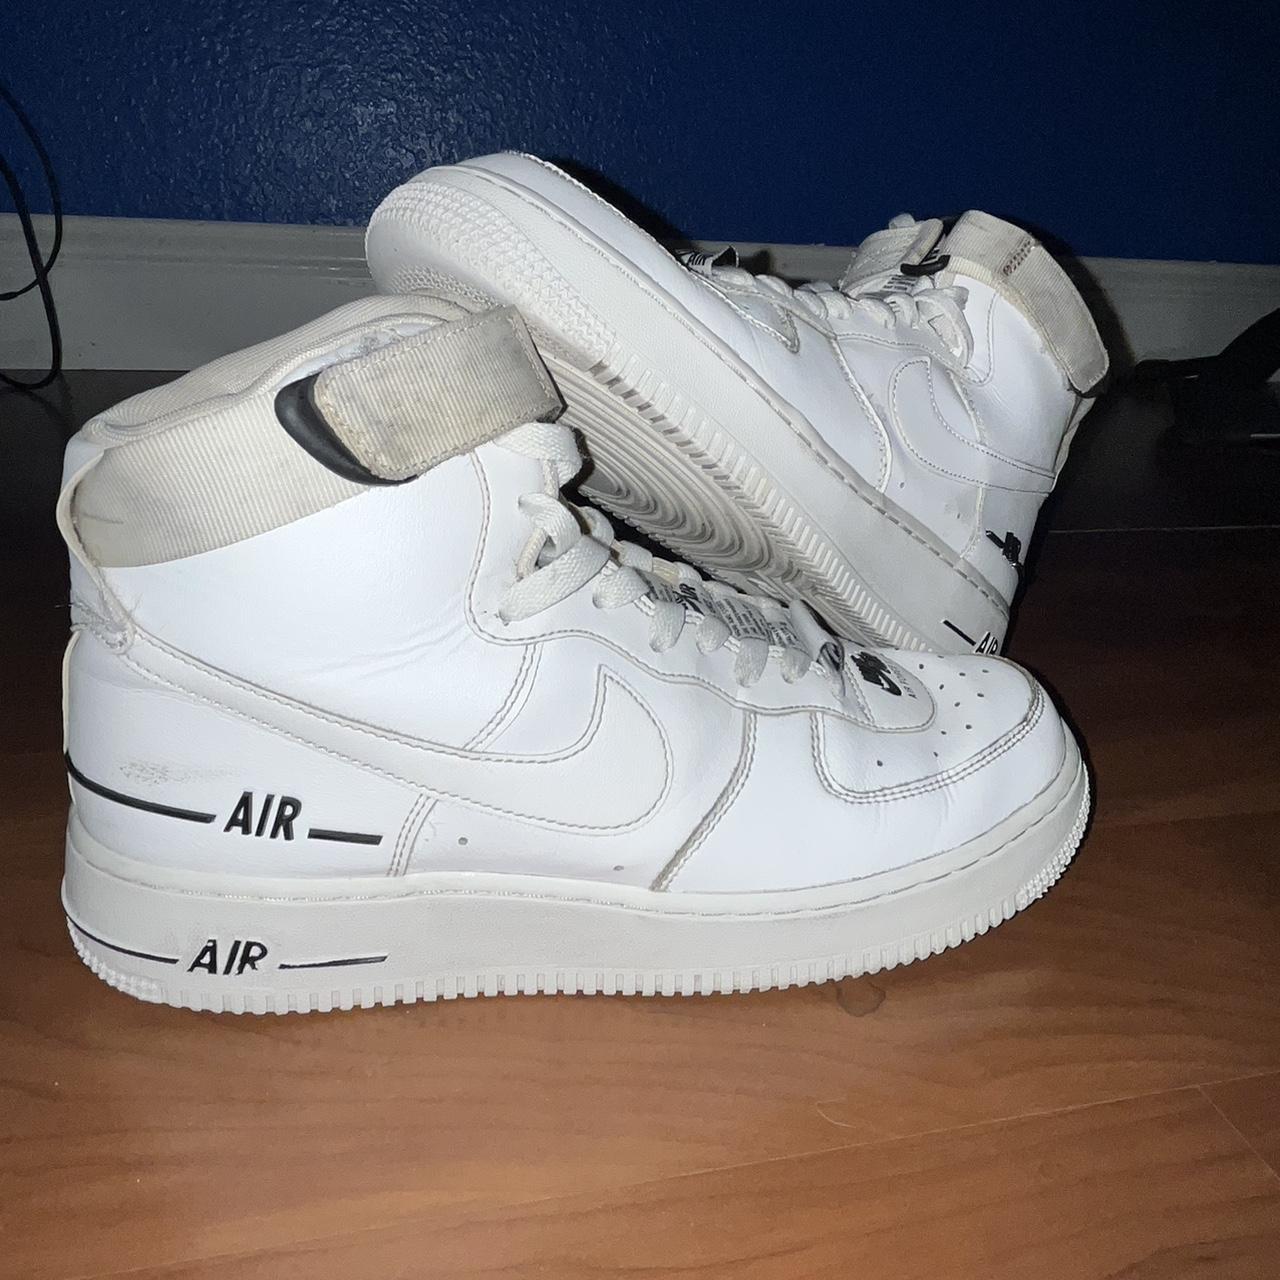 Nike Air Force 1 High '07 LV8 3 Been sitting in my - Depop